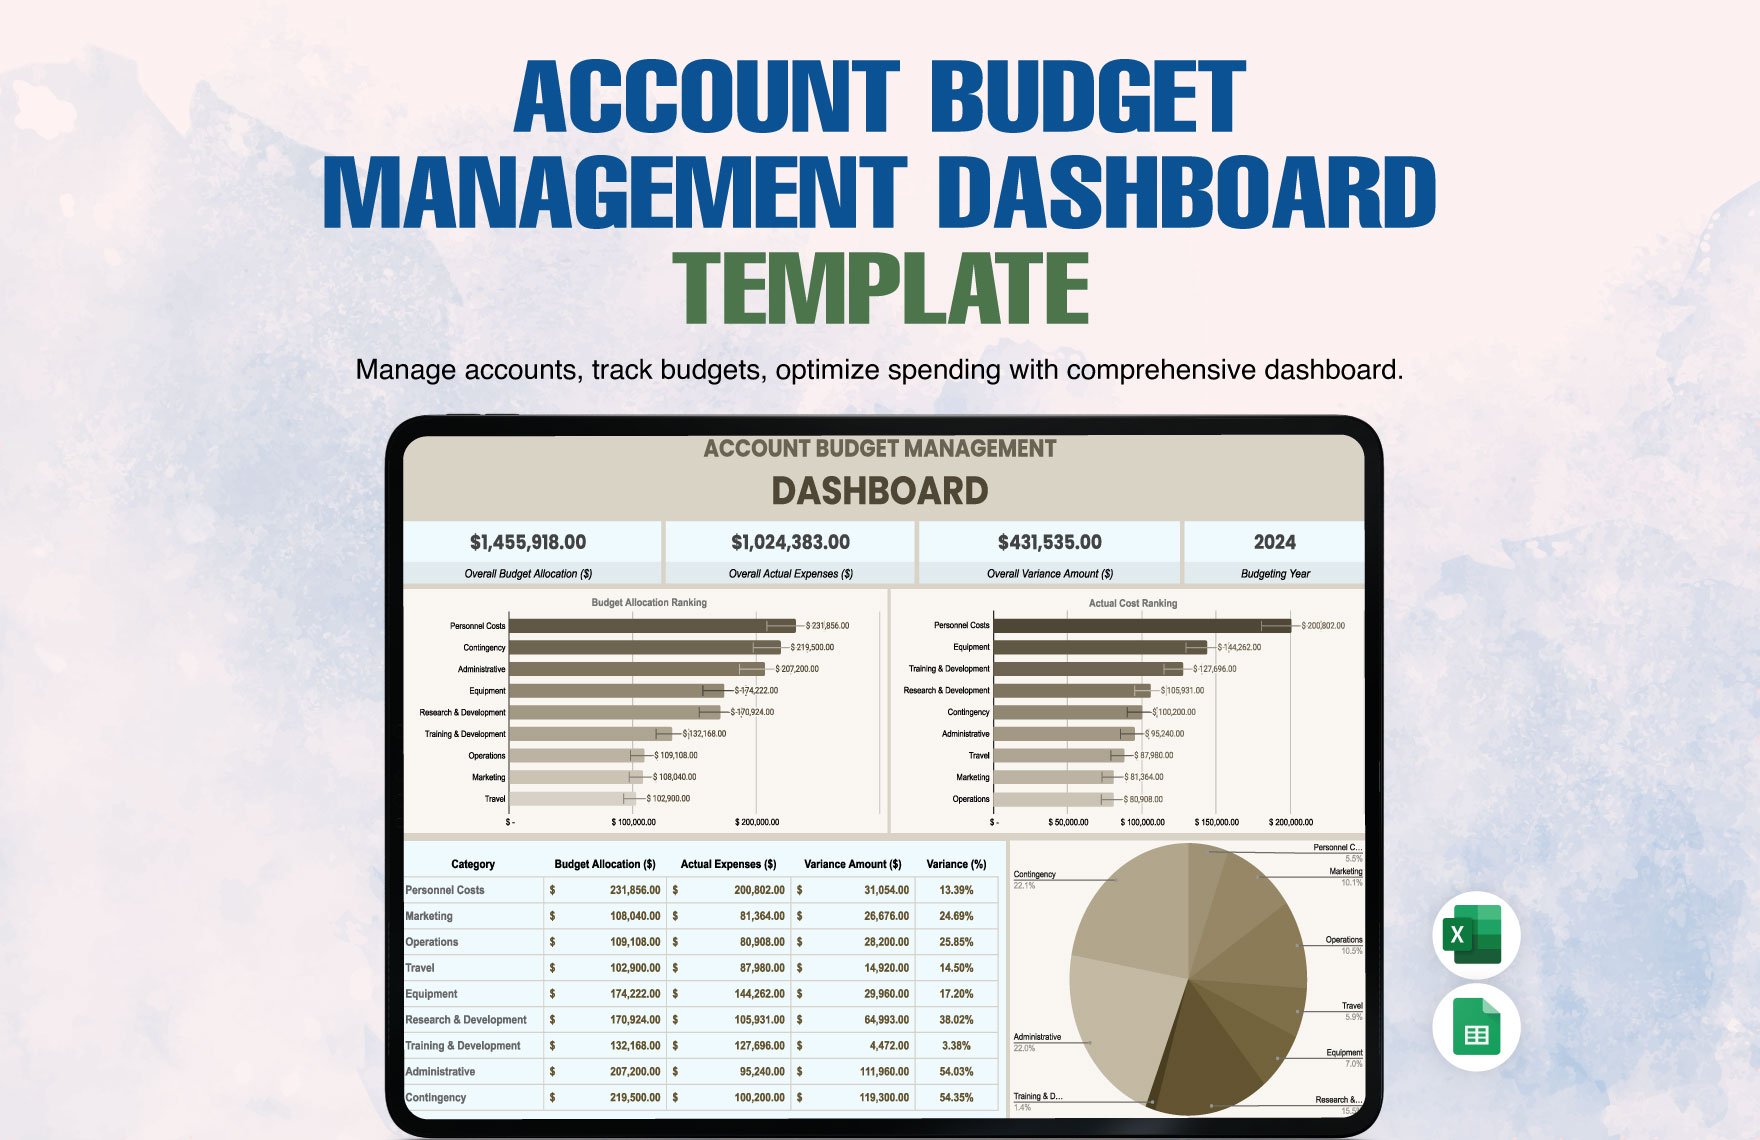 Account Budget Management Dashboard Template in Excel, Google Sheets